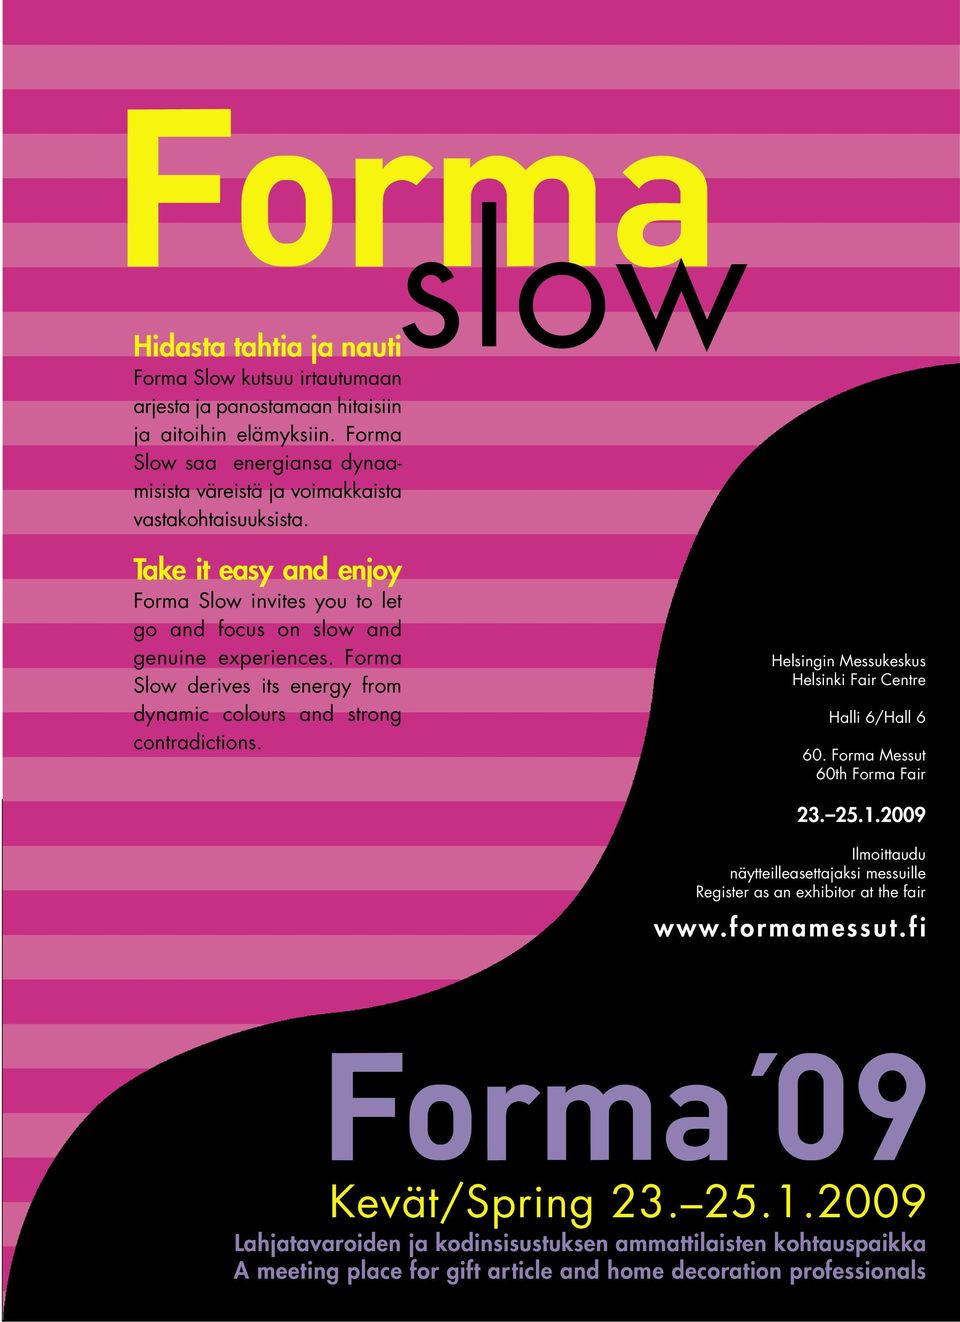 Forma Slow derives its energy from dynamic colours and strong contradictions. Helsingin Messukeskus Helsinki Fair Centre Halli 6/Hall 6 60. Forma Messut 60th Forma Fair 23. 25.1.